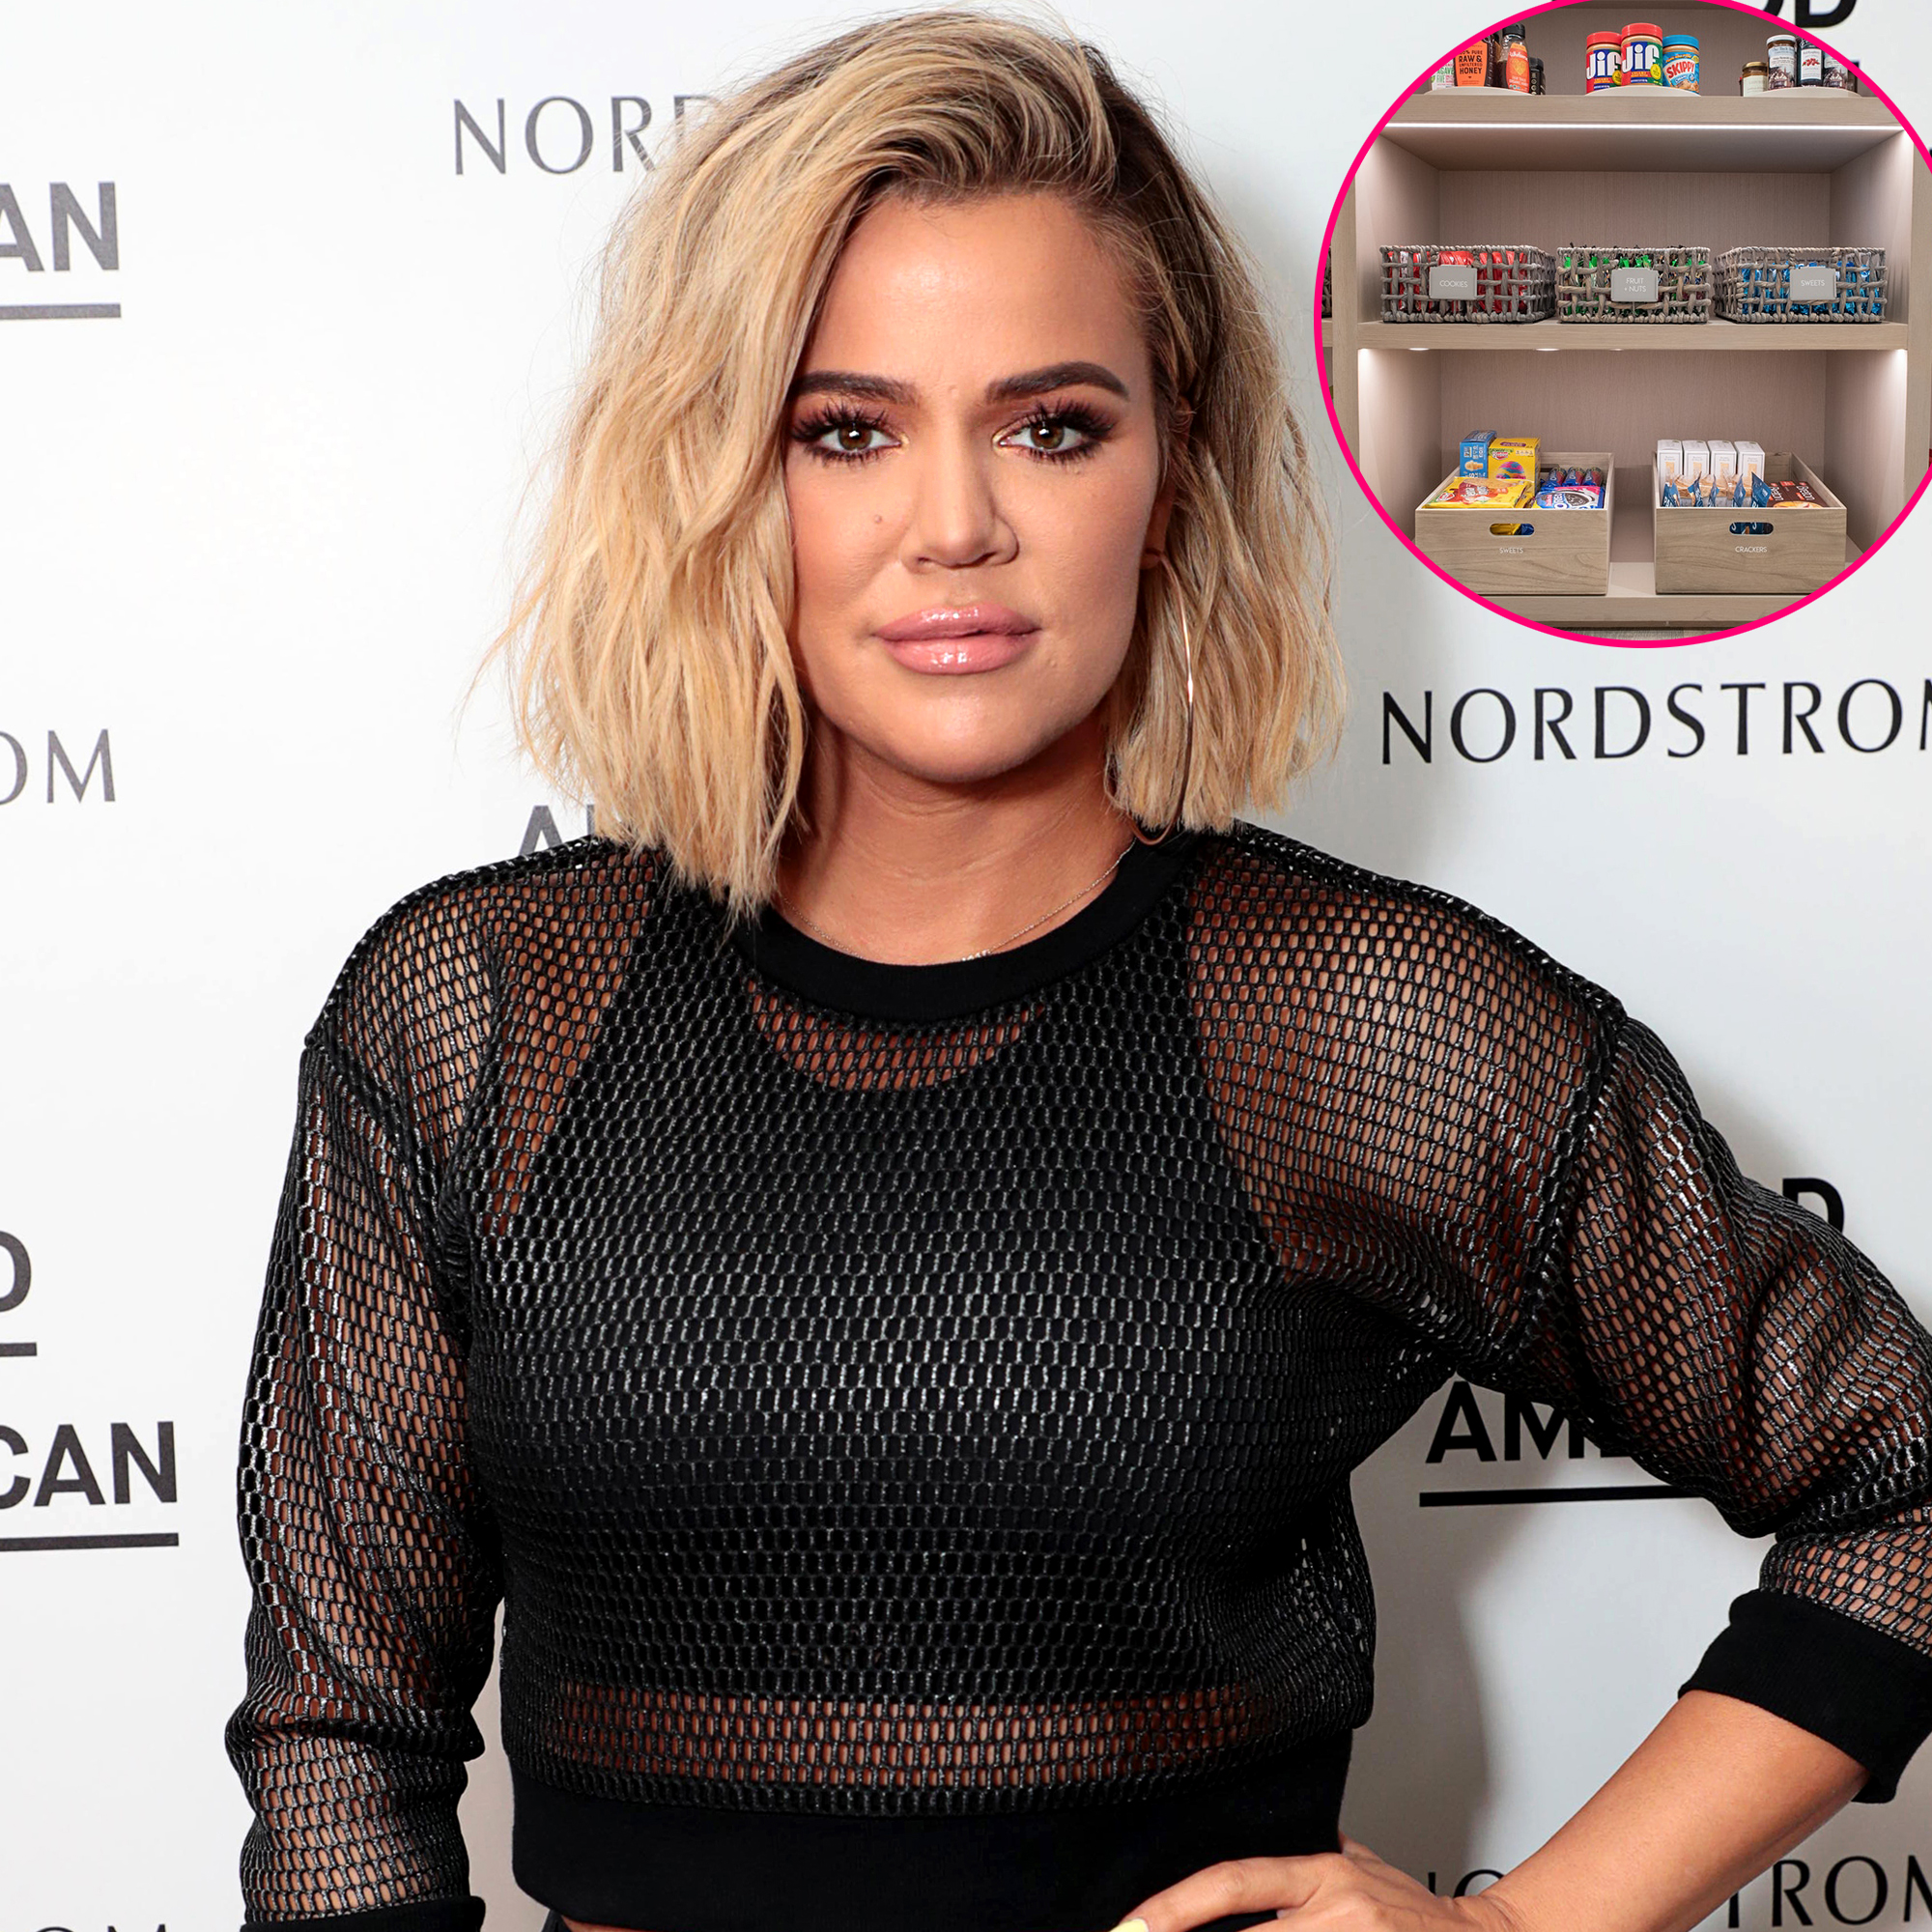 See Khloé Kardashian's Super-Organized Pantry After Its 2022 Makeover